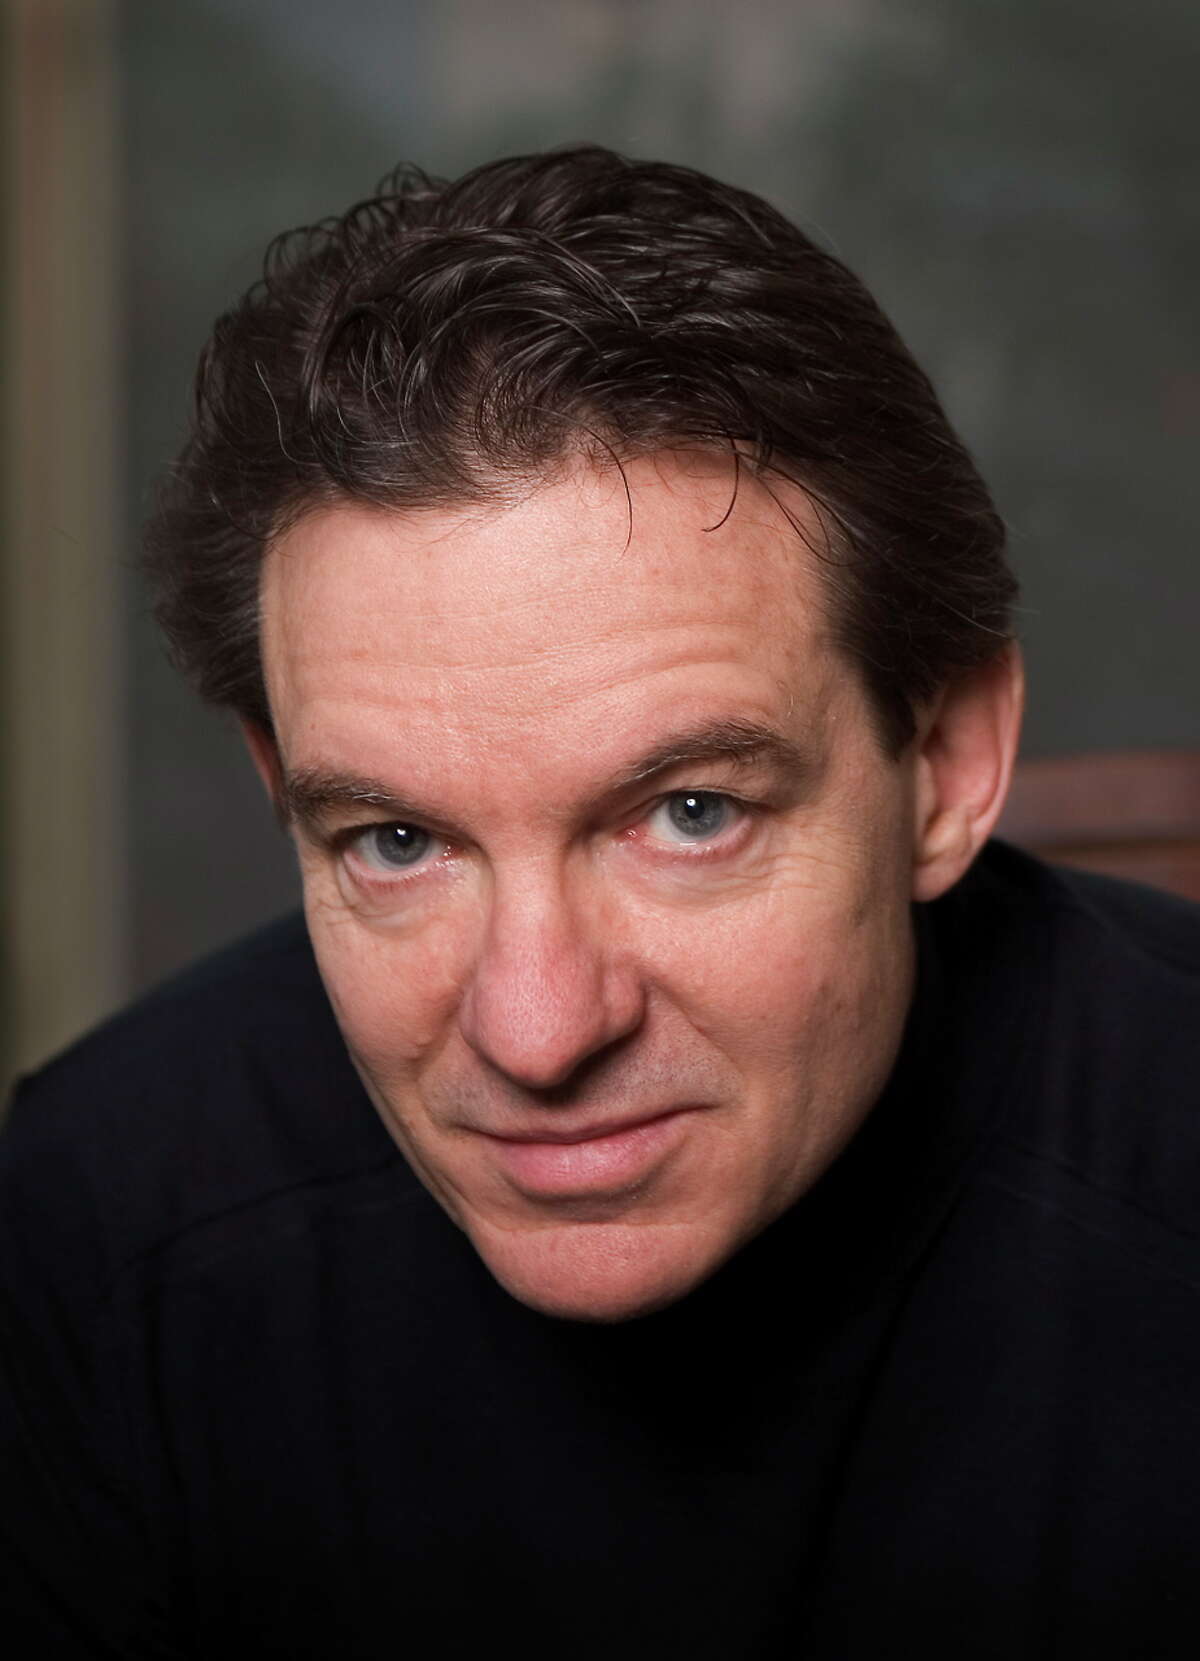 Lawrence Wright is the author of "Going Clear: Scientology, Hollywood, and the Prison of Belief."